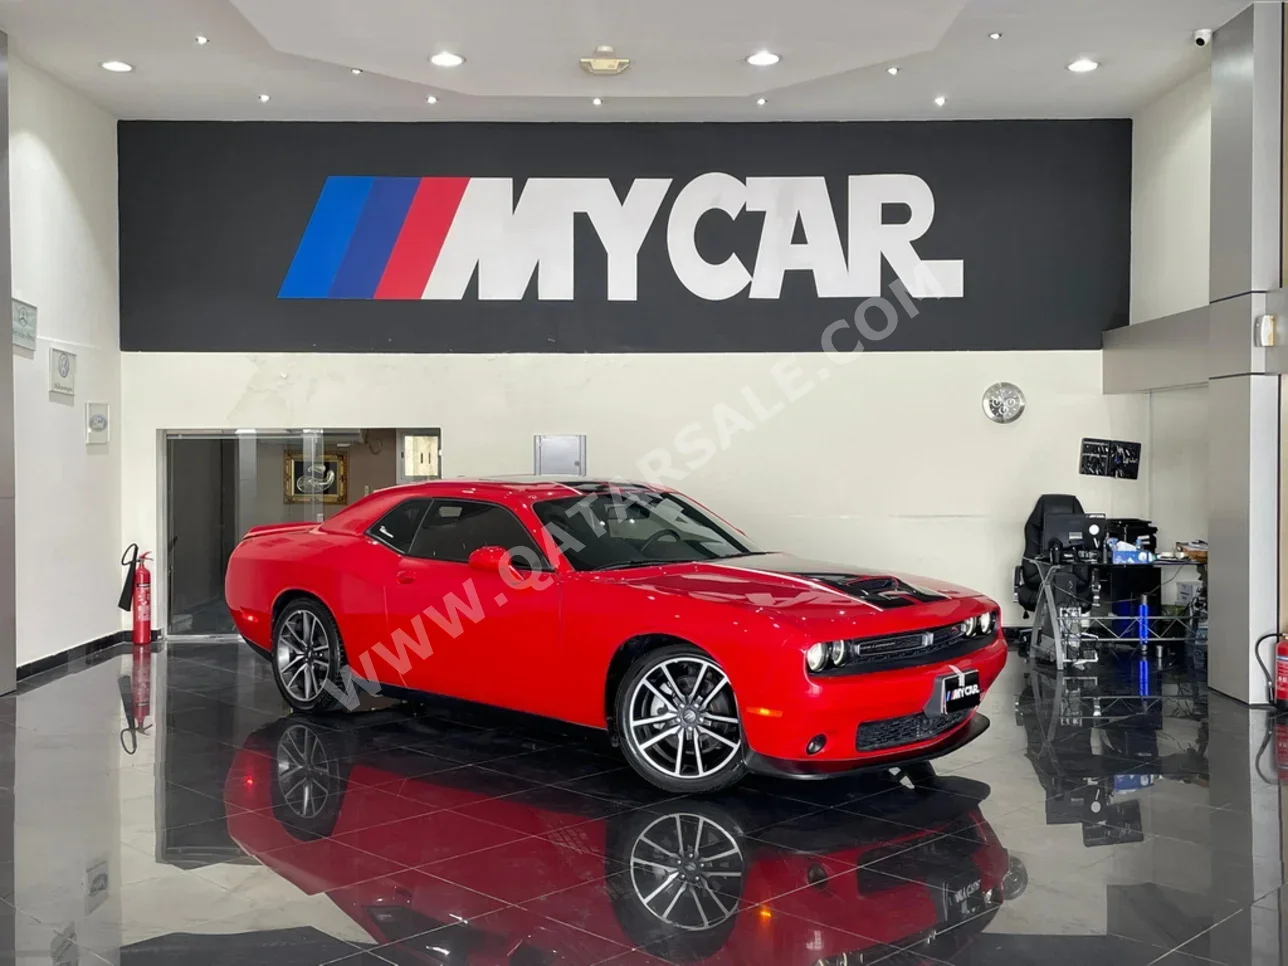 Dodge  Challenger  R/T  2021  Automatic  41٬000 Km  8 Cylinder  Rear Wheel Drive (RWD)  Coupe / Sport  Red  With Warranty